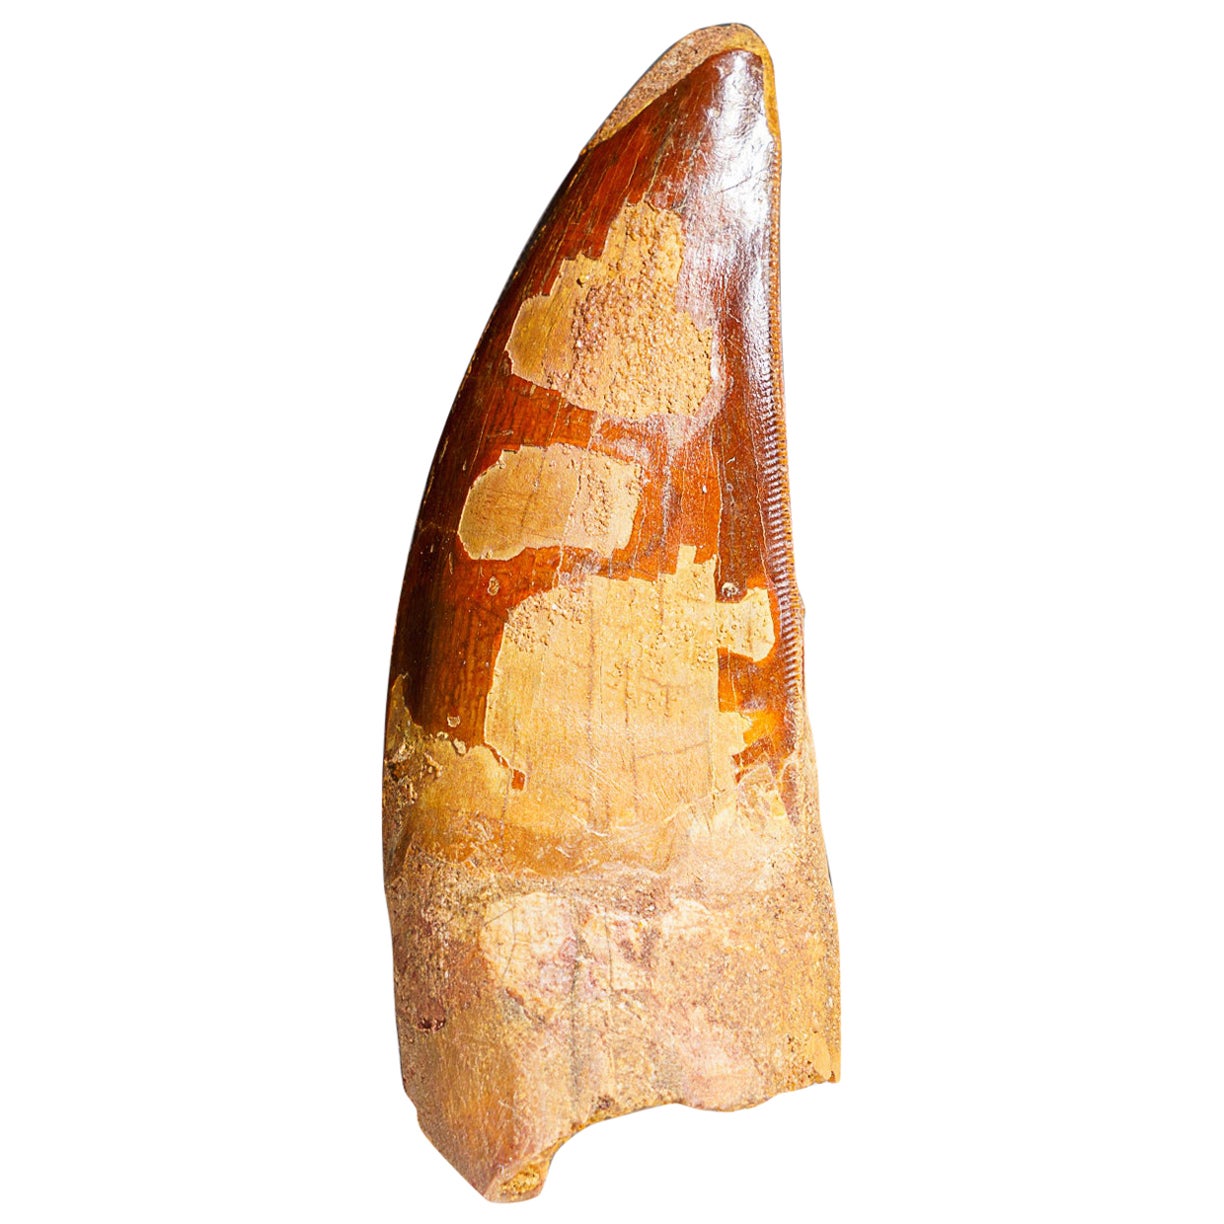 Genuine Natural Large Carcharodontosaurus Dinosaur Tooth (75.8 grams) For Sale